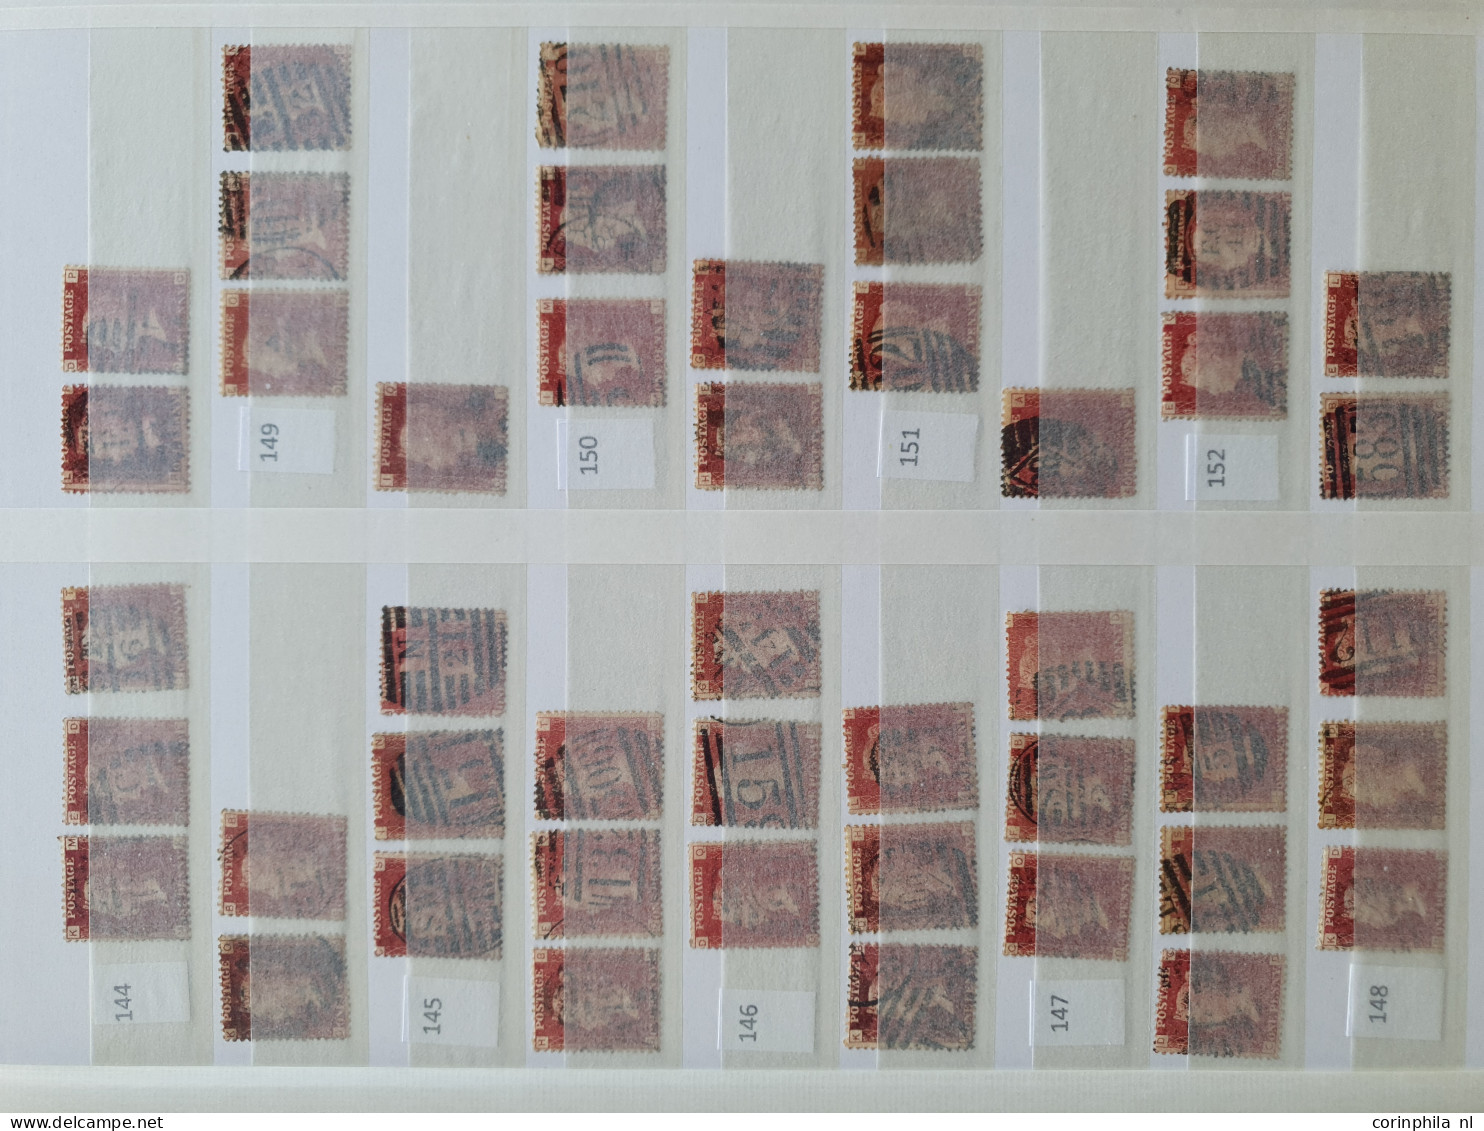 1840-1988 stock mostly used in mixed quality including better items, plate numbers, some postmarks etc. in 2 stockbooks